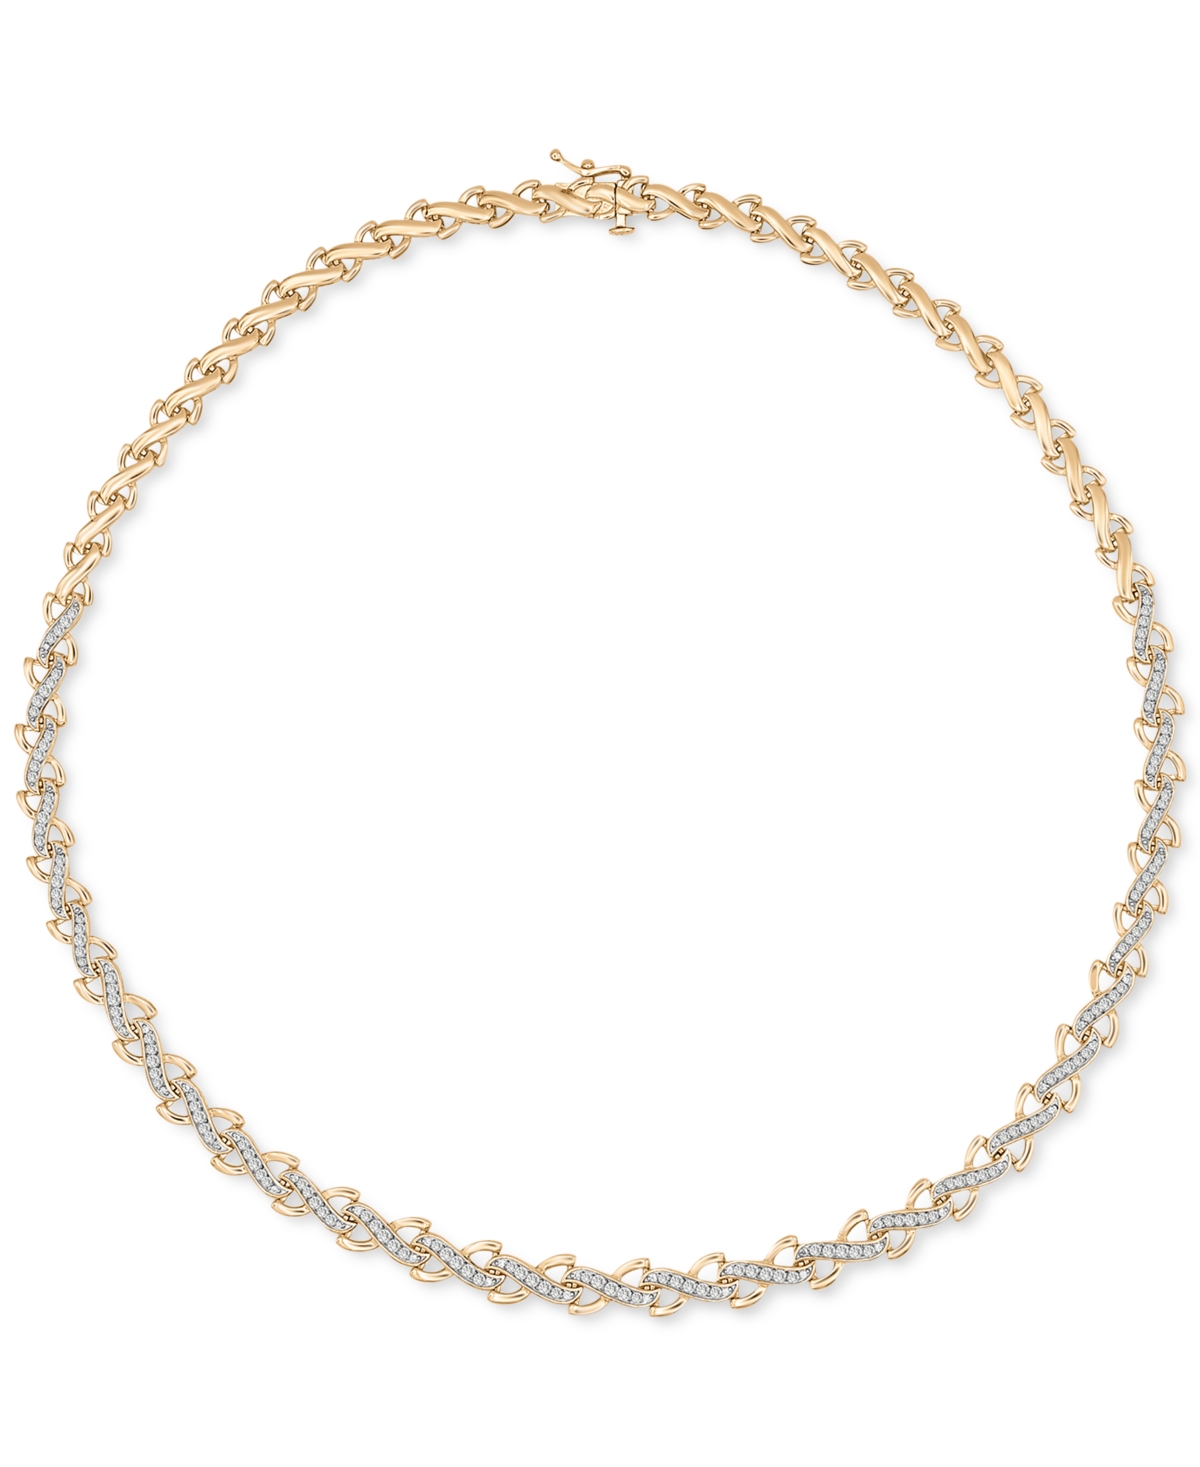 Diamond All-Around 17" Collar Necklace (1 ct. t.w.) in 10k Gold, Created for Macy's - Yellow Gold